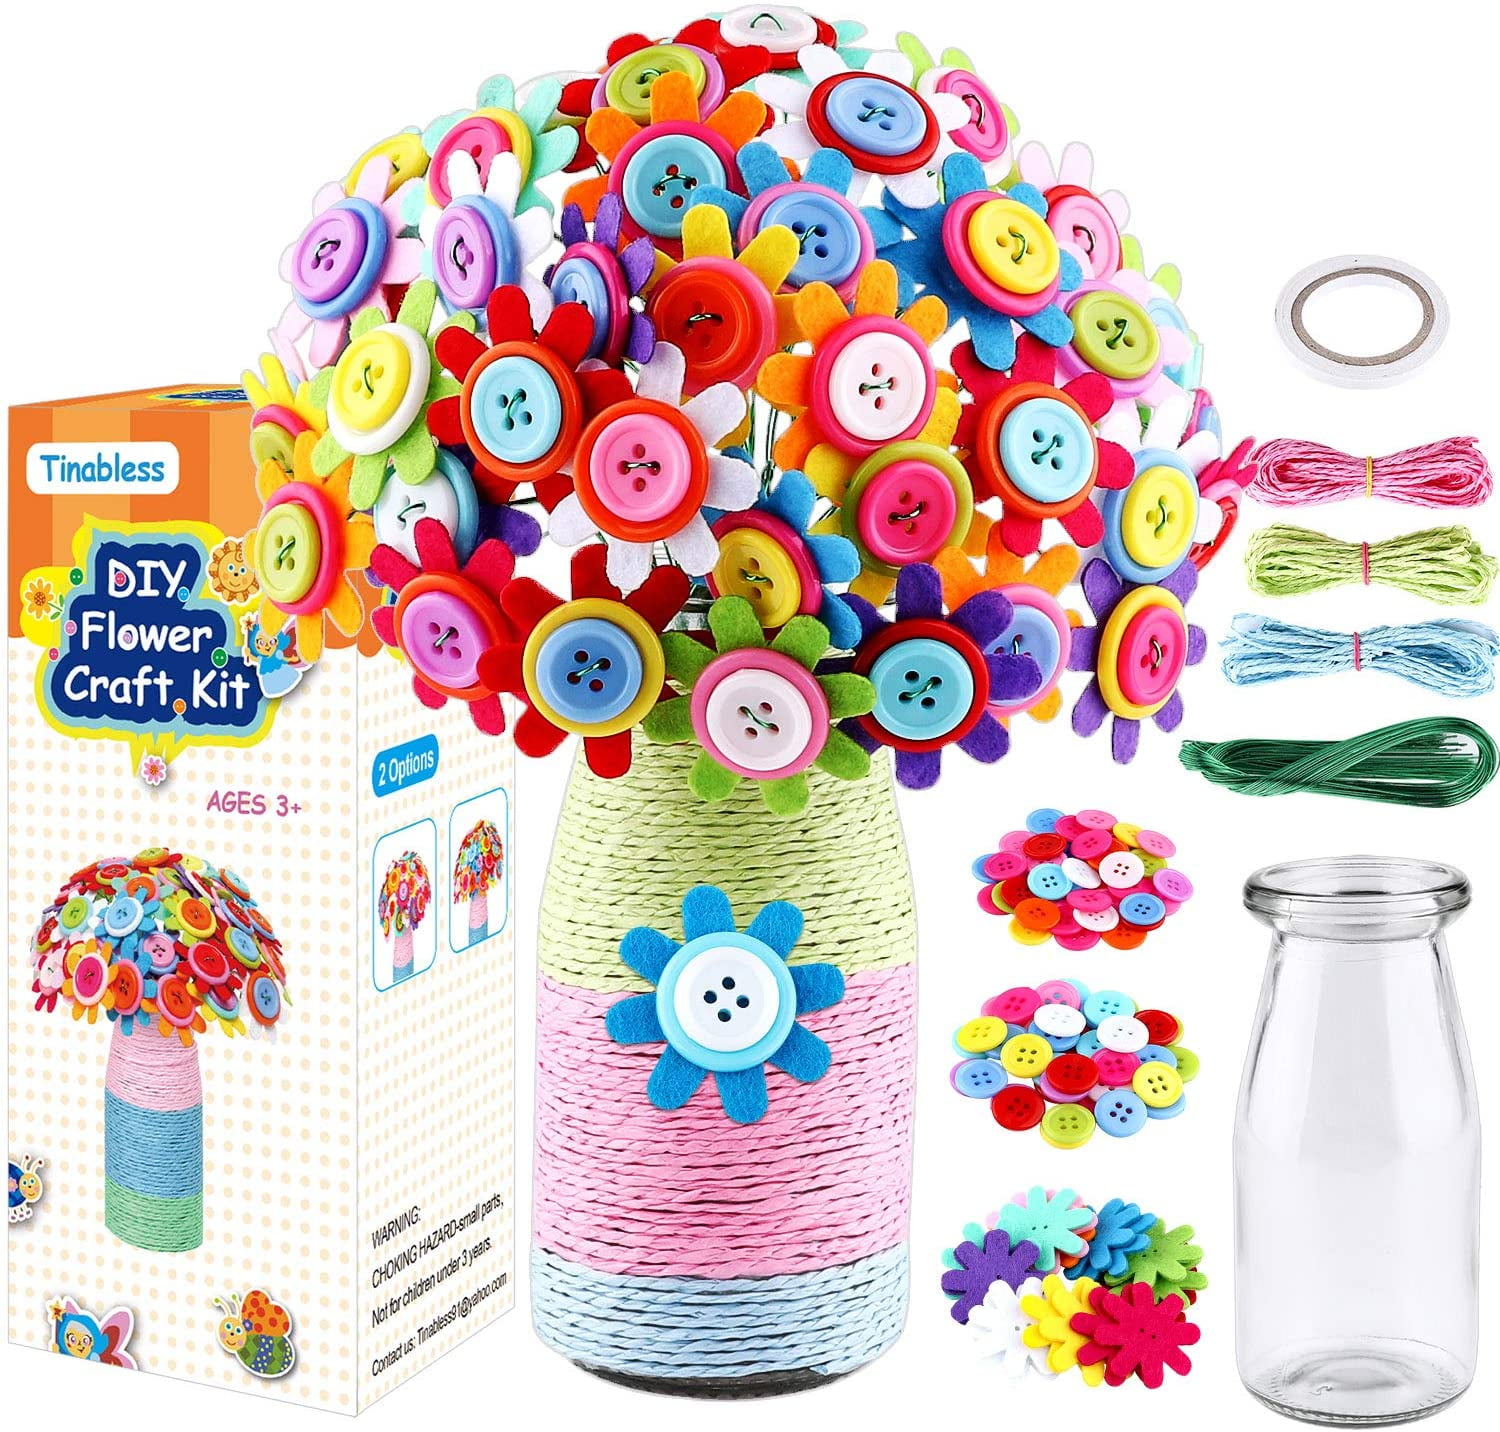 HULASO Arts and Crafts for Girls Ages 6-12 Make Your Own Flower Bouquet  with Buttons and Felt Flowers, DIY Activity Supplies Vase Art and Craft  Kits